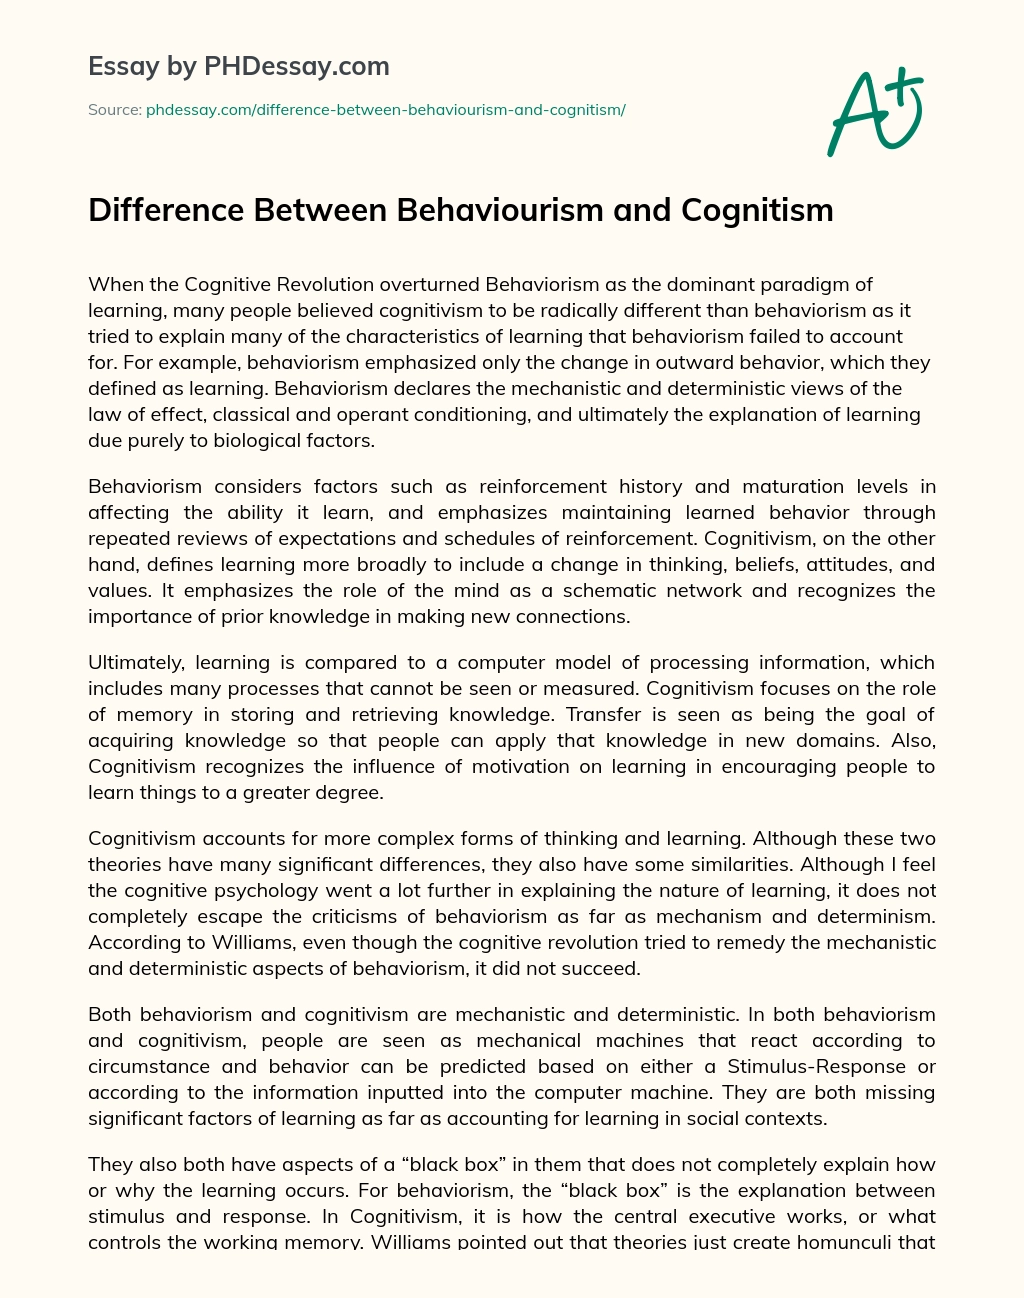 Difference Between Behaviourism and Cognitism essay